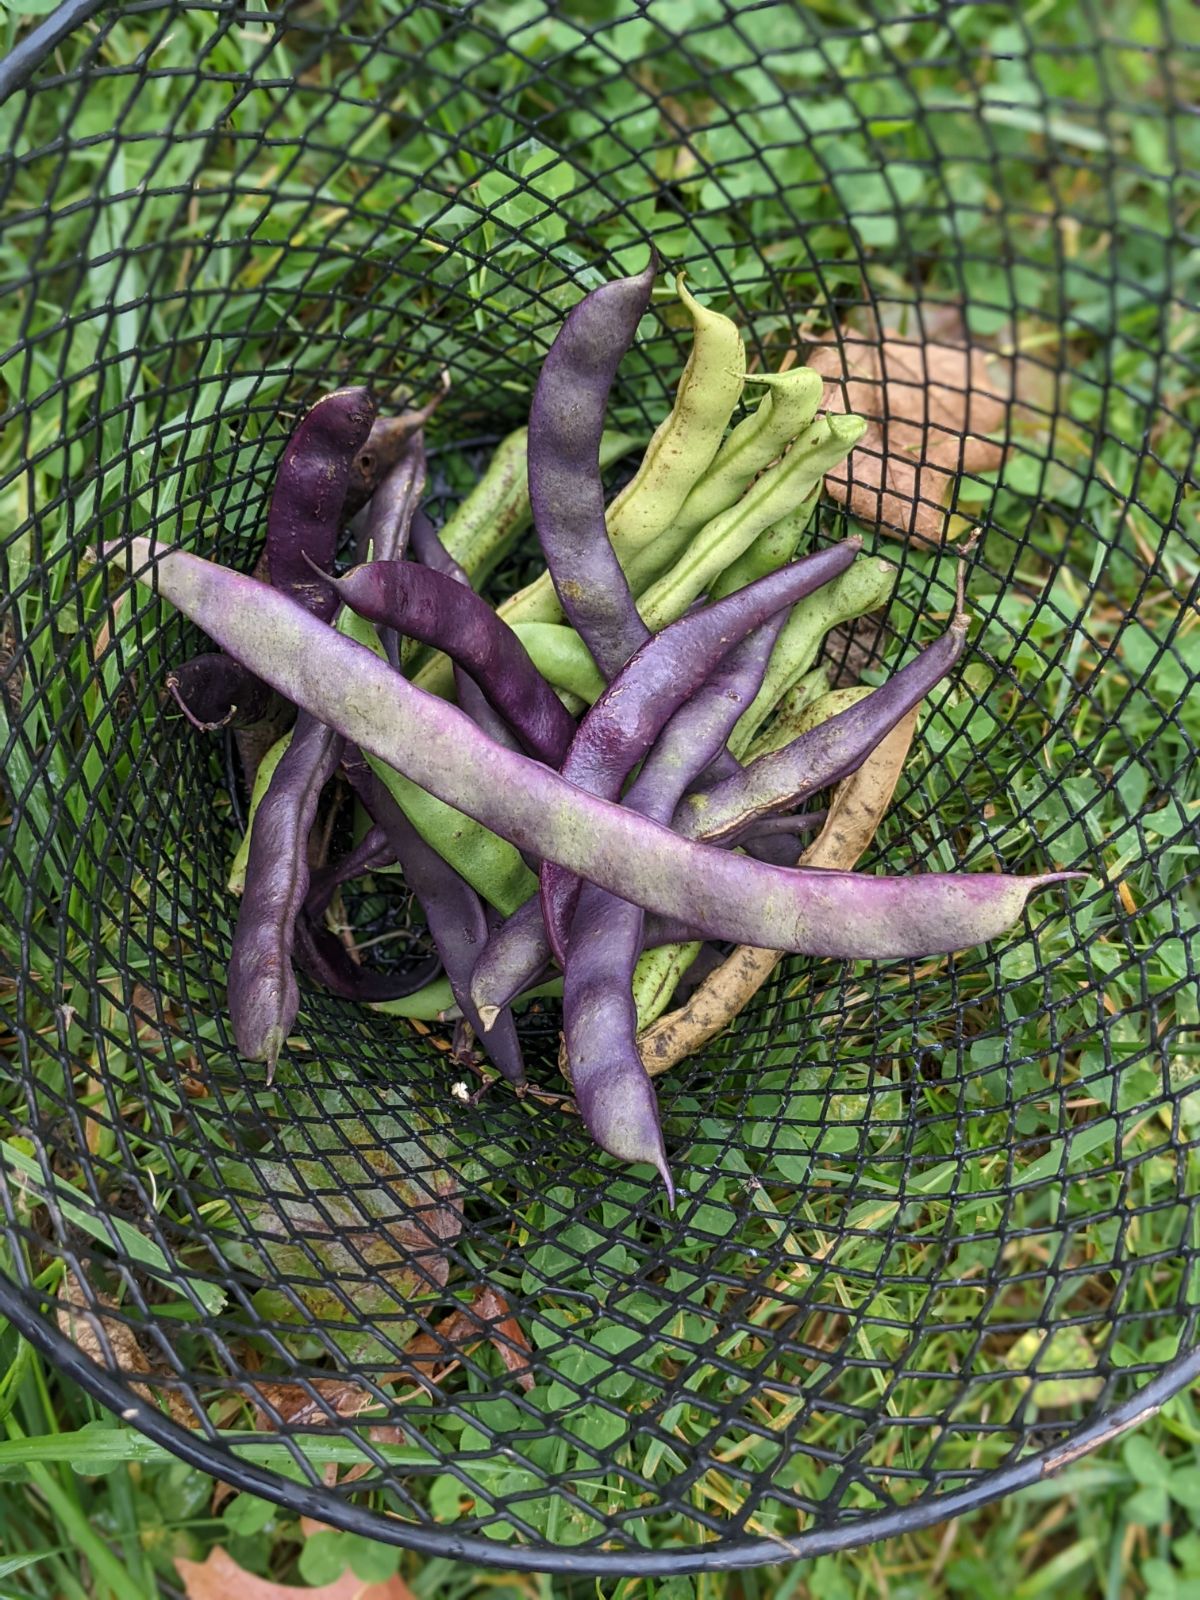 Wire basket full of lots of large, overripe pole beans with seeds inside